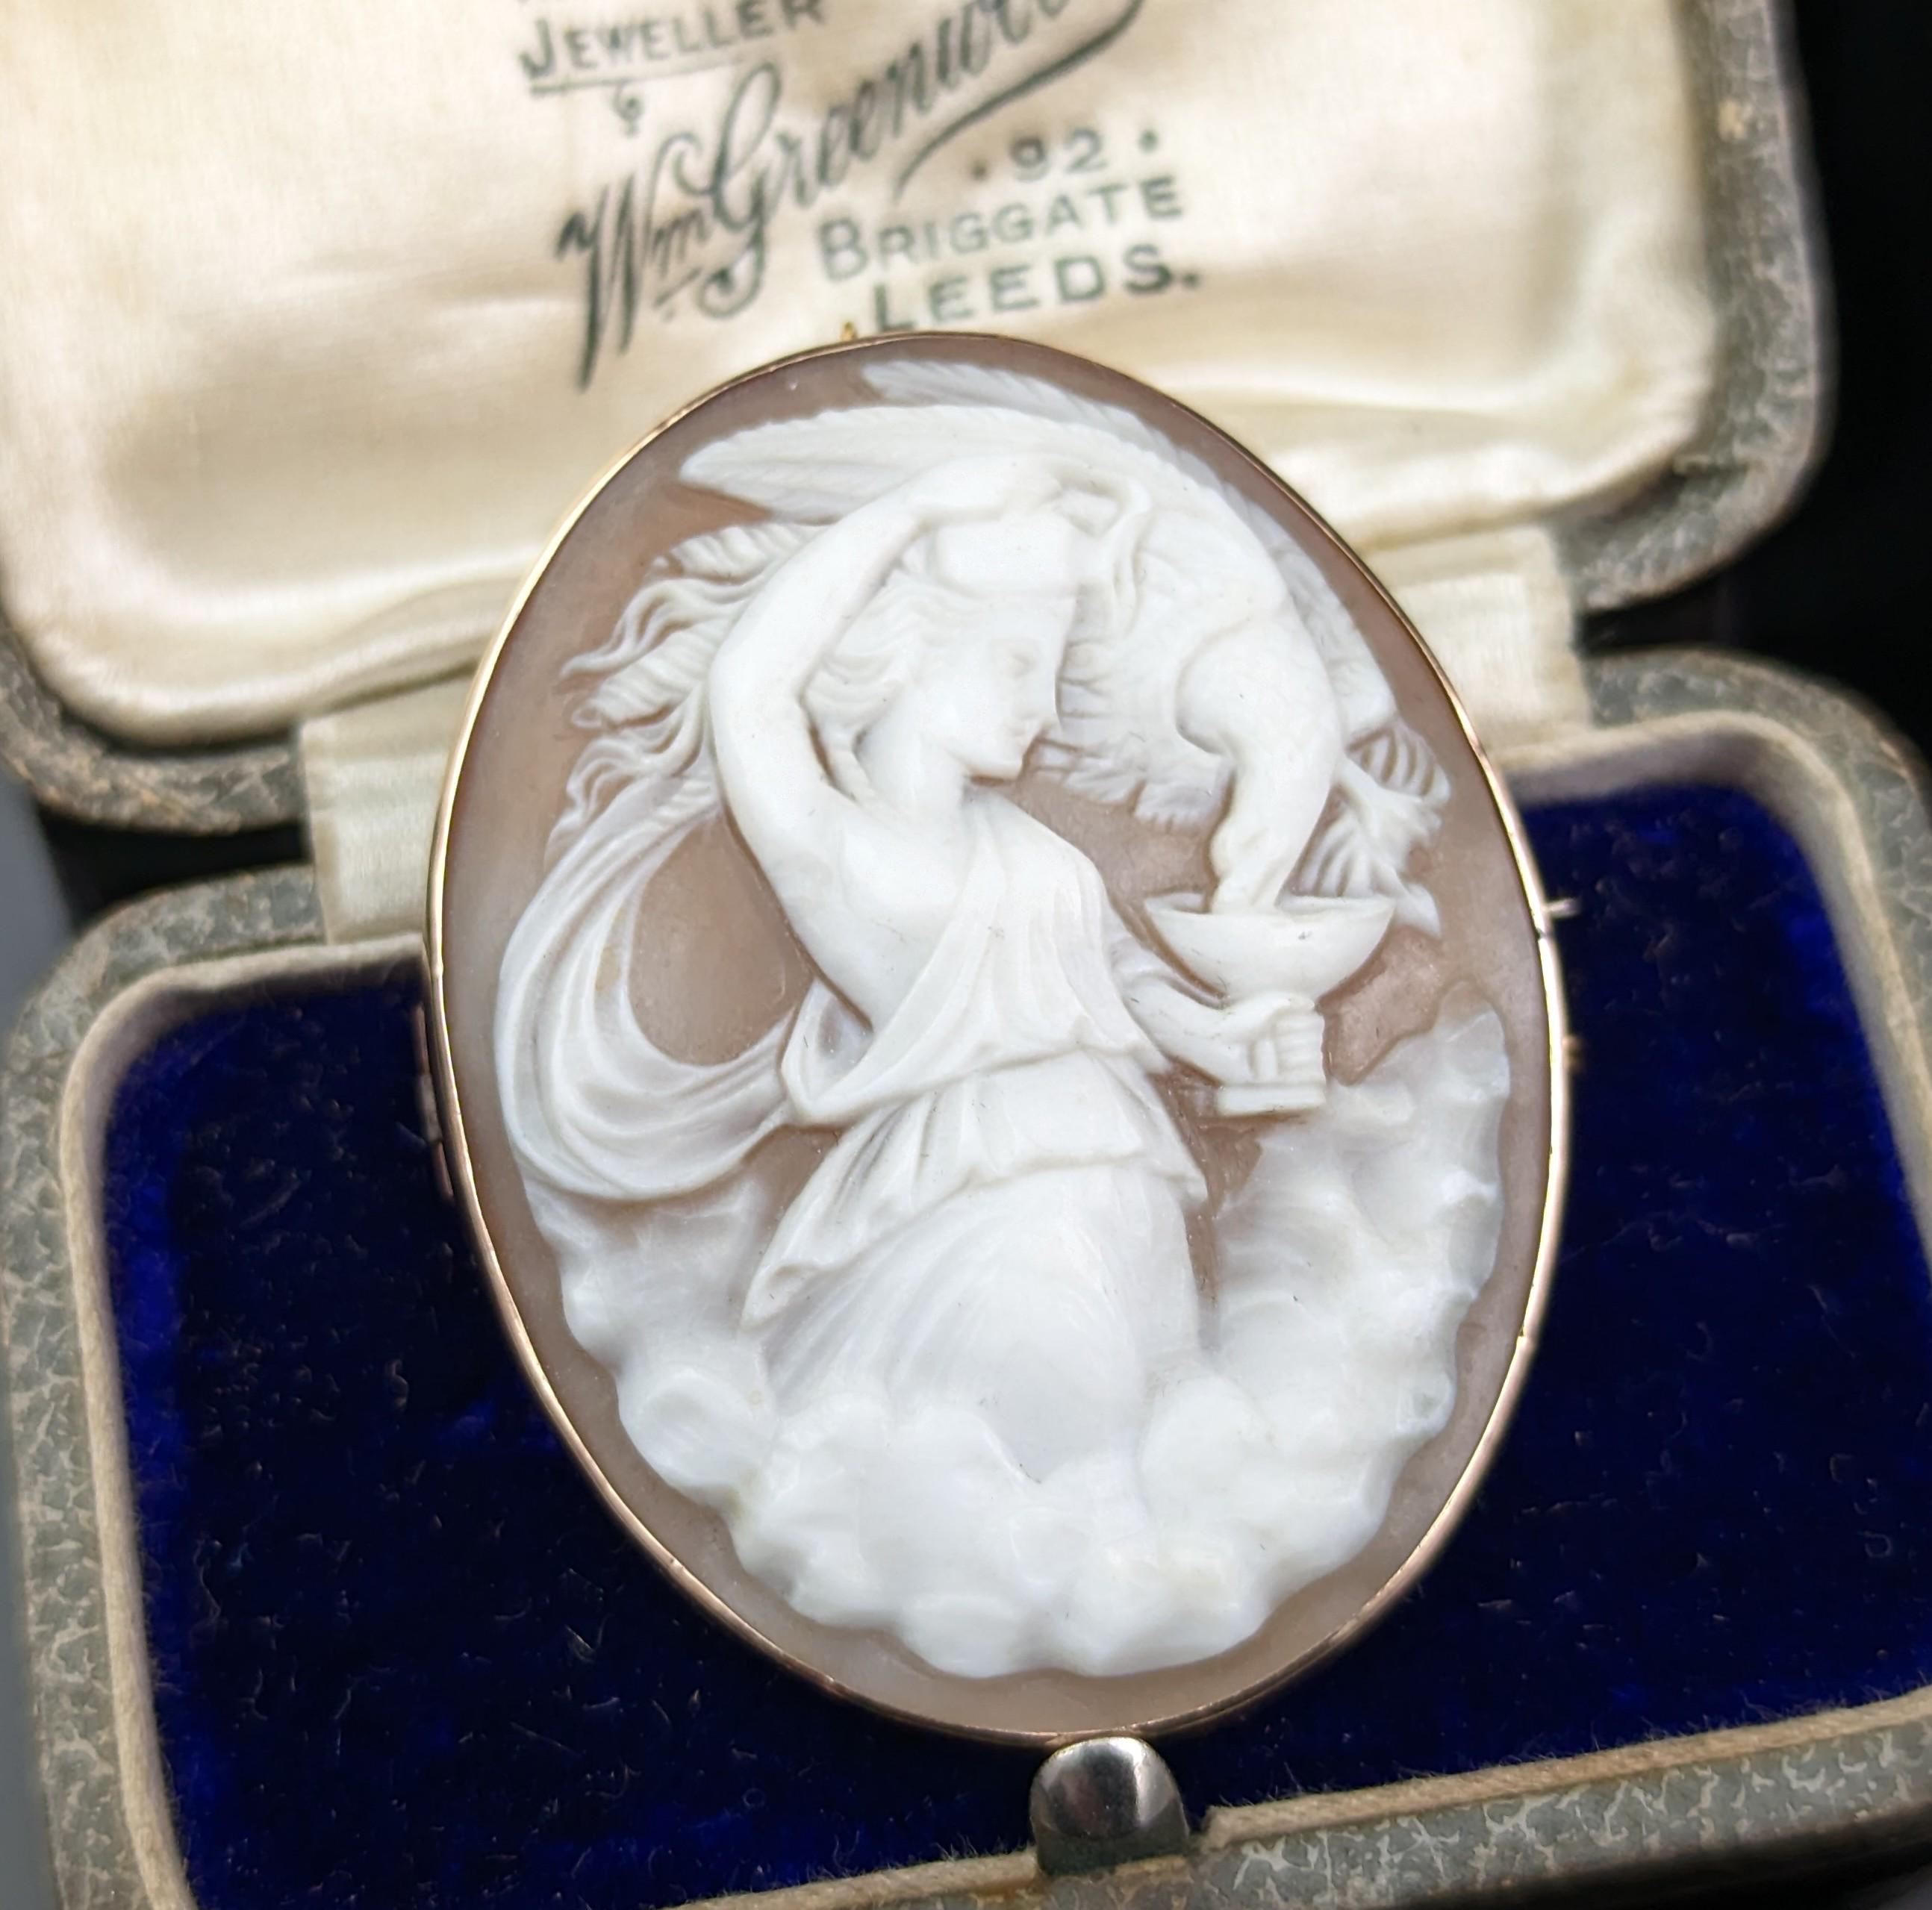 This fine and attractive antique Victorian era 9kt gold cameo brooch is really second to none in its detail and design.

A very finely carved bullmouth shell cameo depicting Hebe feeding nectar to Zeus as the eagle, housed in a smooth and rich 9kt